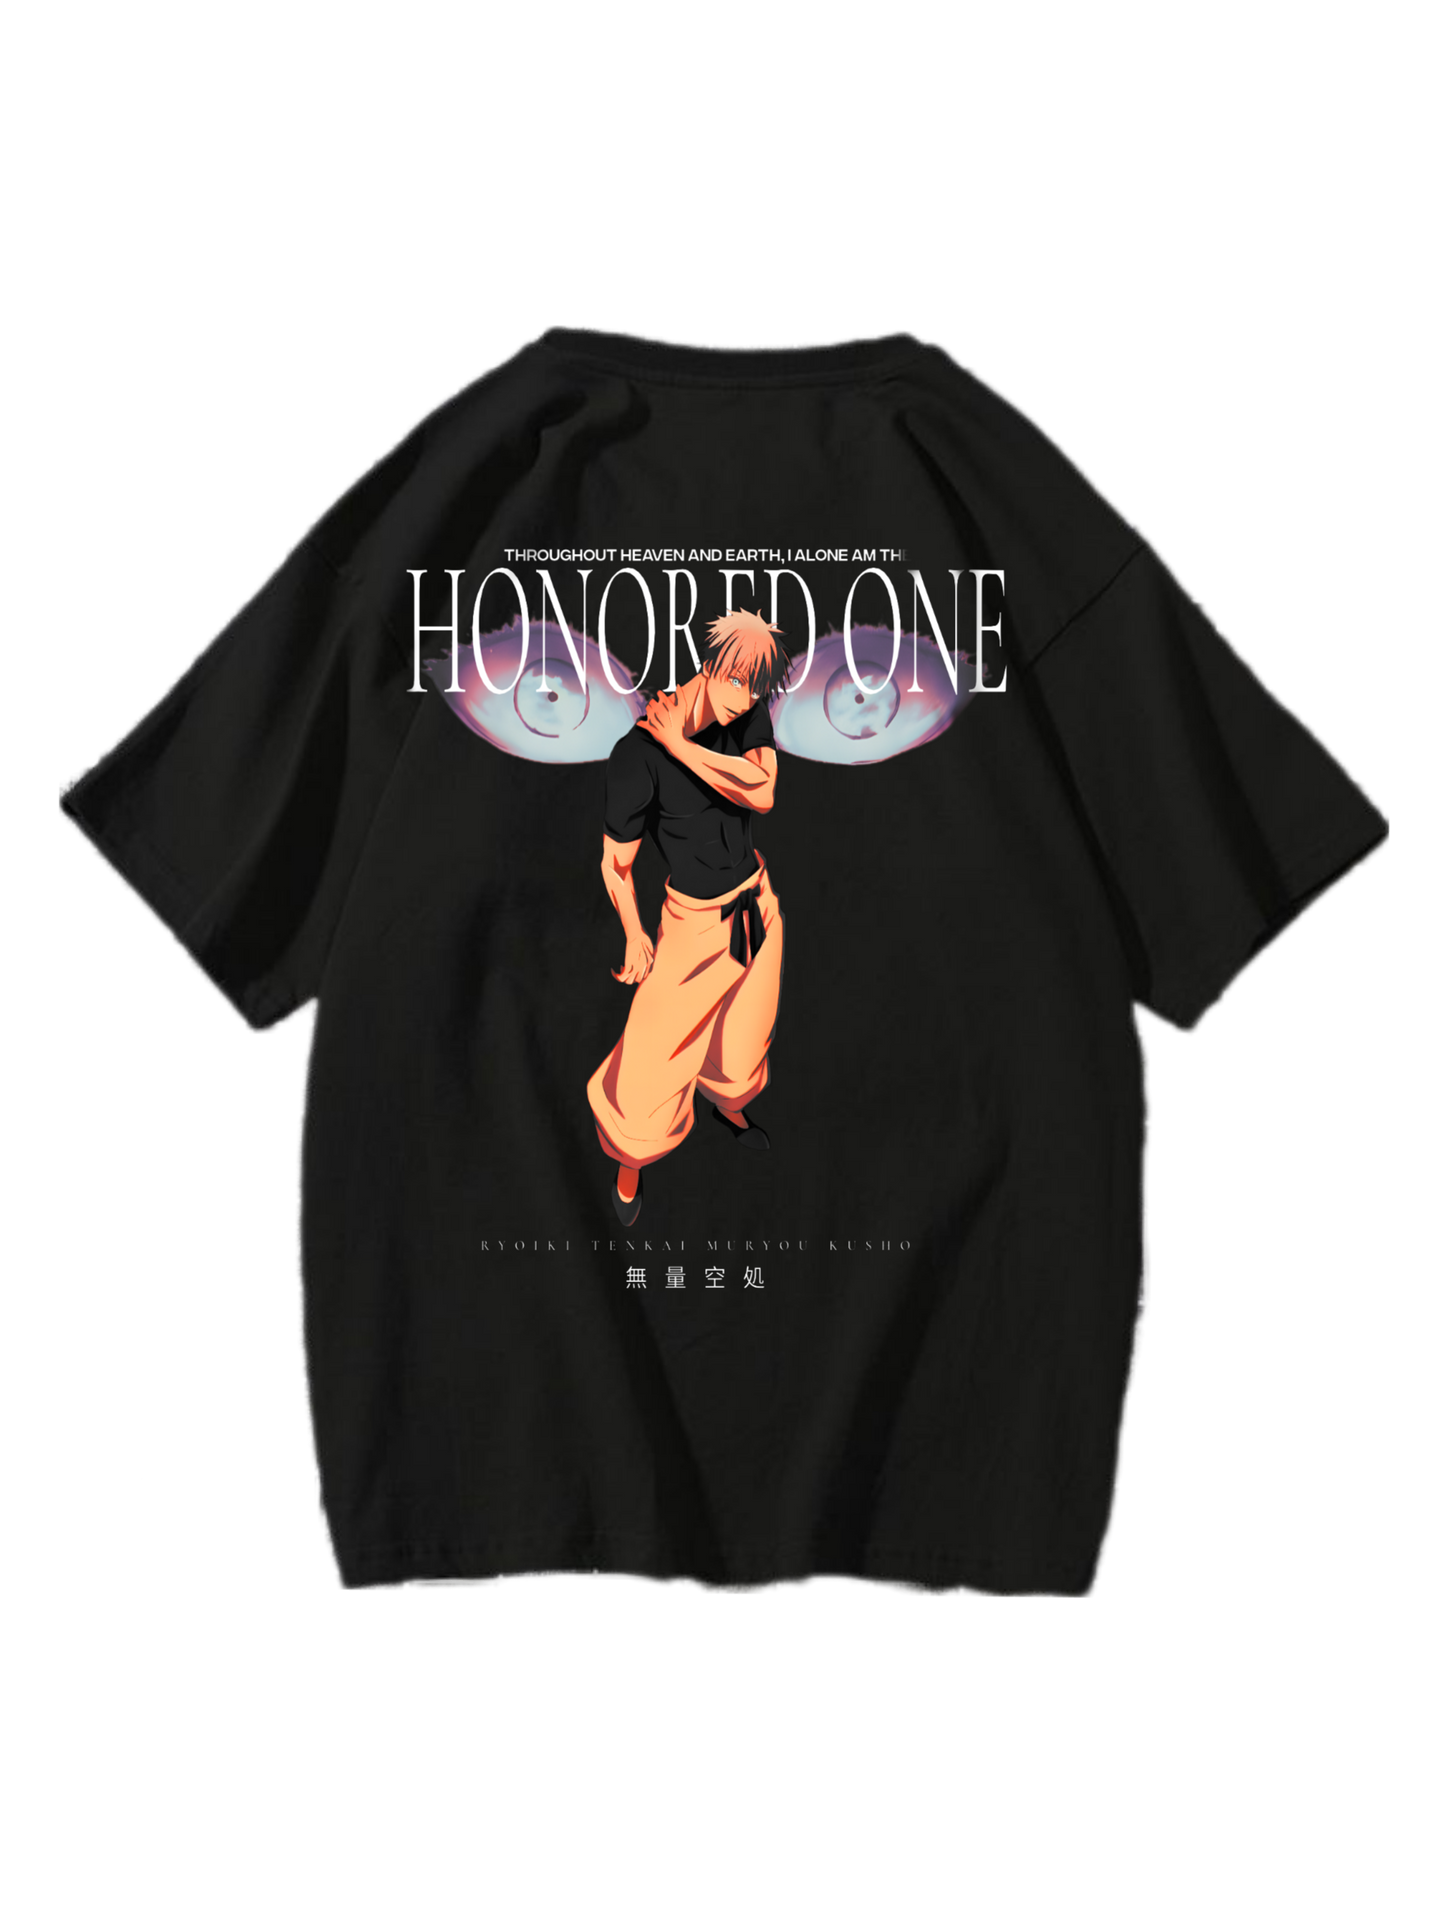 “The honored one” graphic tee